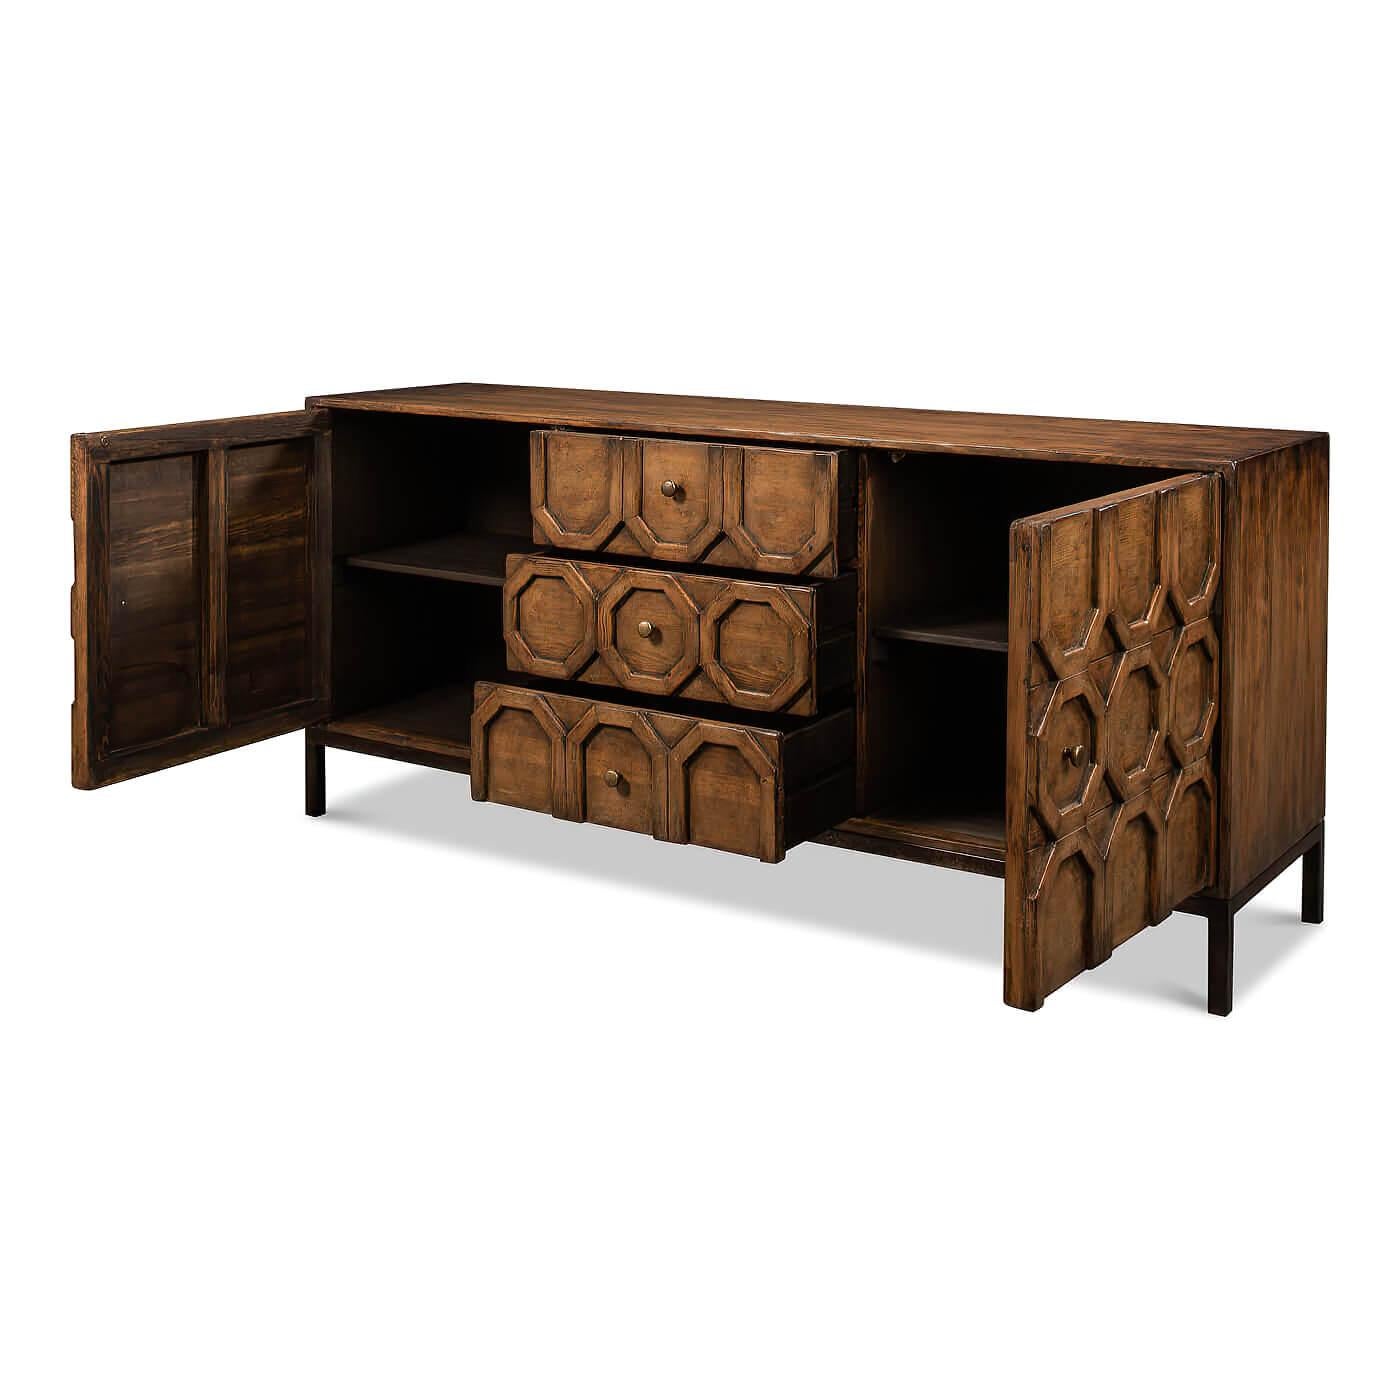 A modern geometric sideboard. This front has a unique applique design with patterns of octagons running down the center. It has two doors and a bank of three drawers in the center. The sideboard rests on a metal base. 

This beautiful piece is